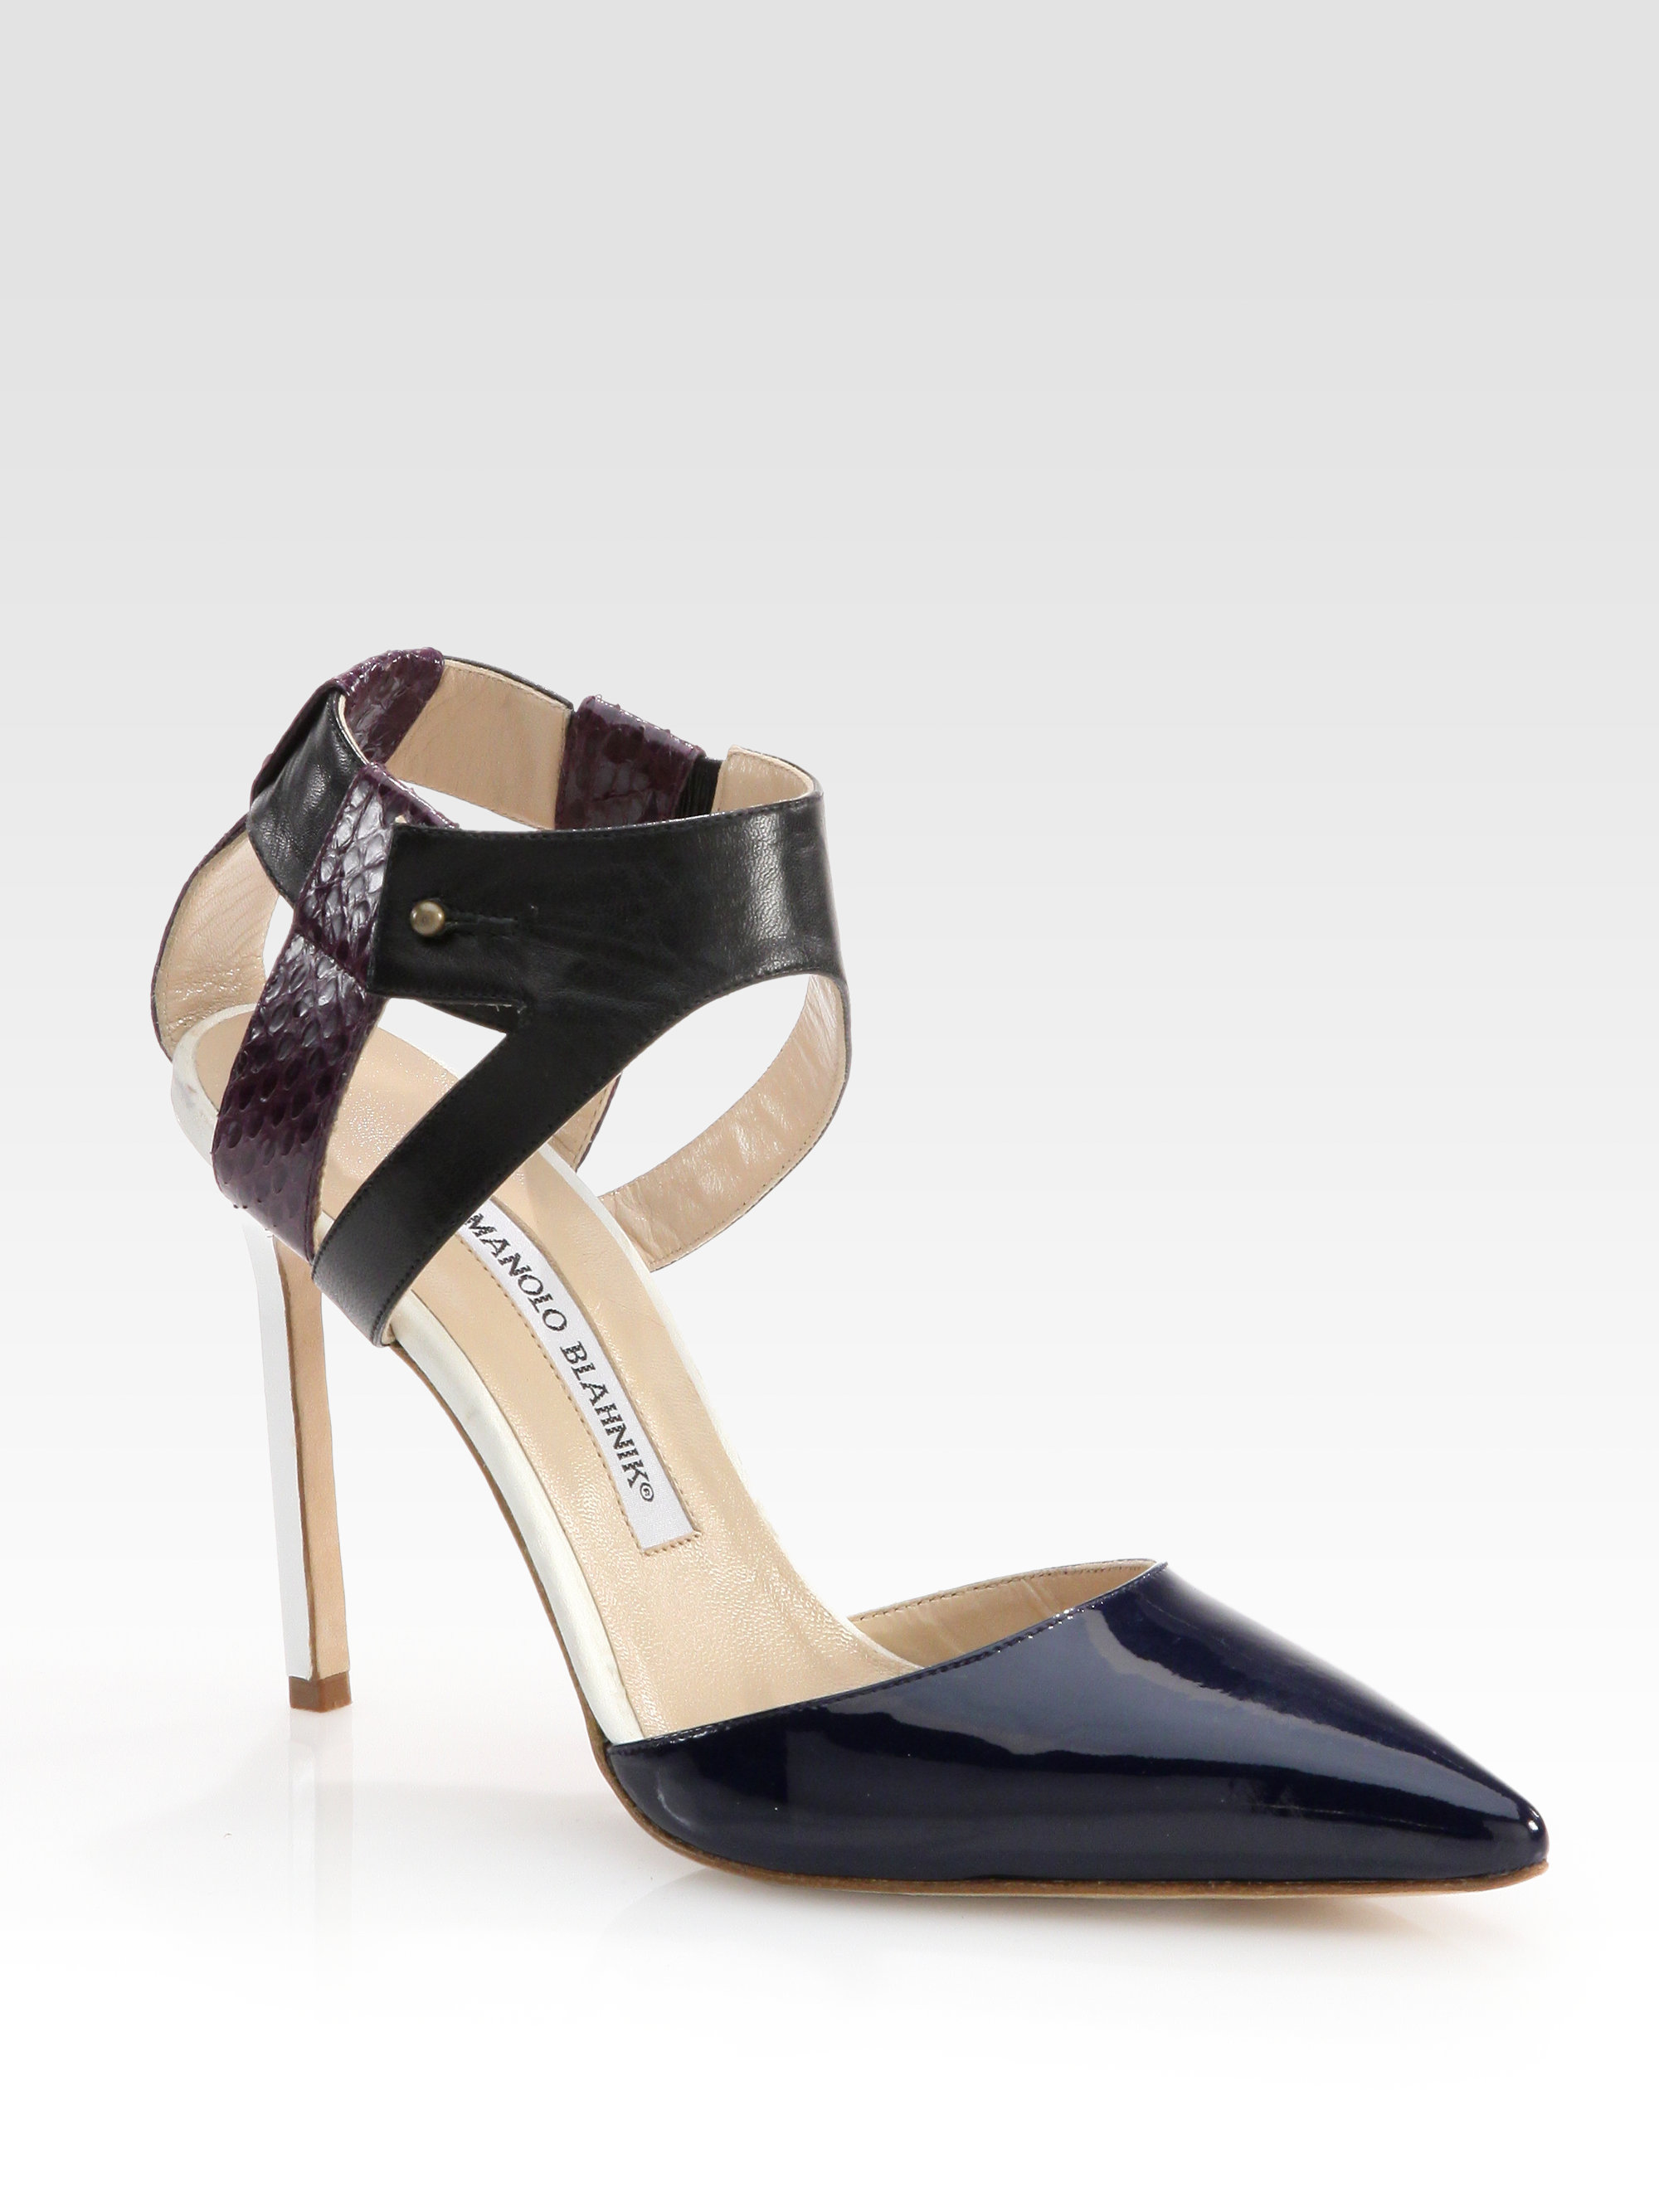 Manolo Blahnik Colter Snakeskin Patent Leather Pumps In Blue Navy Lyst